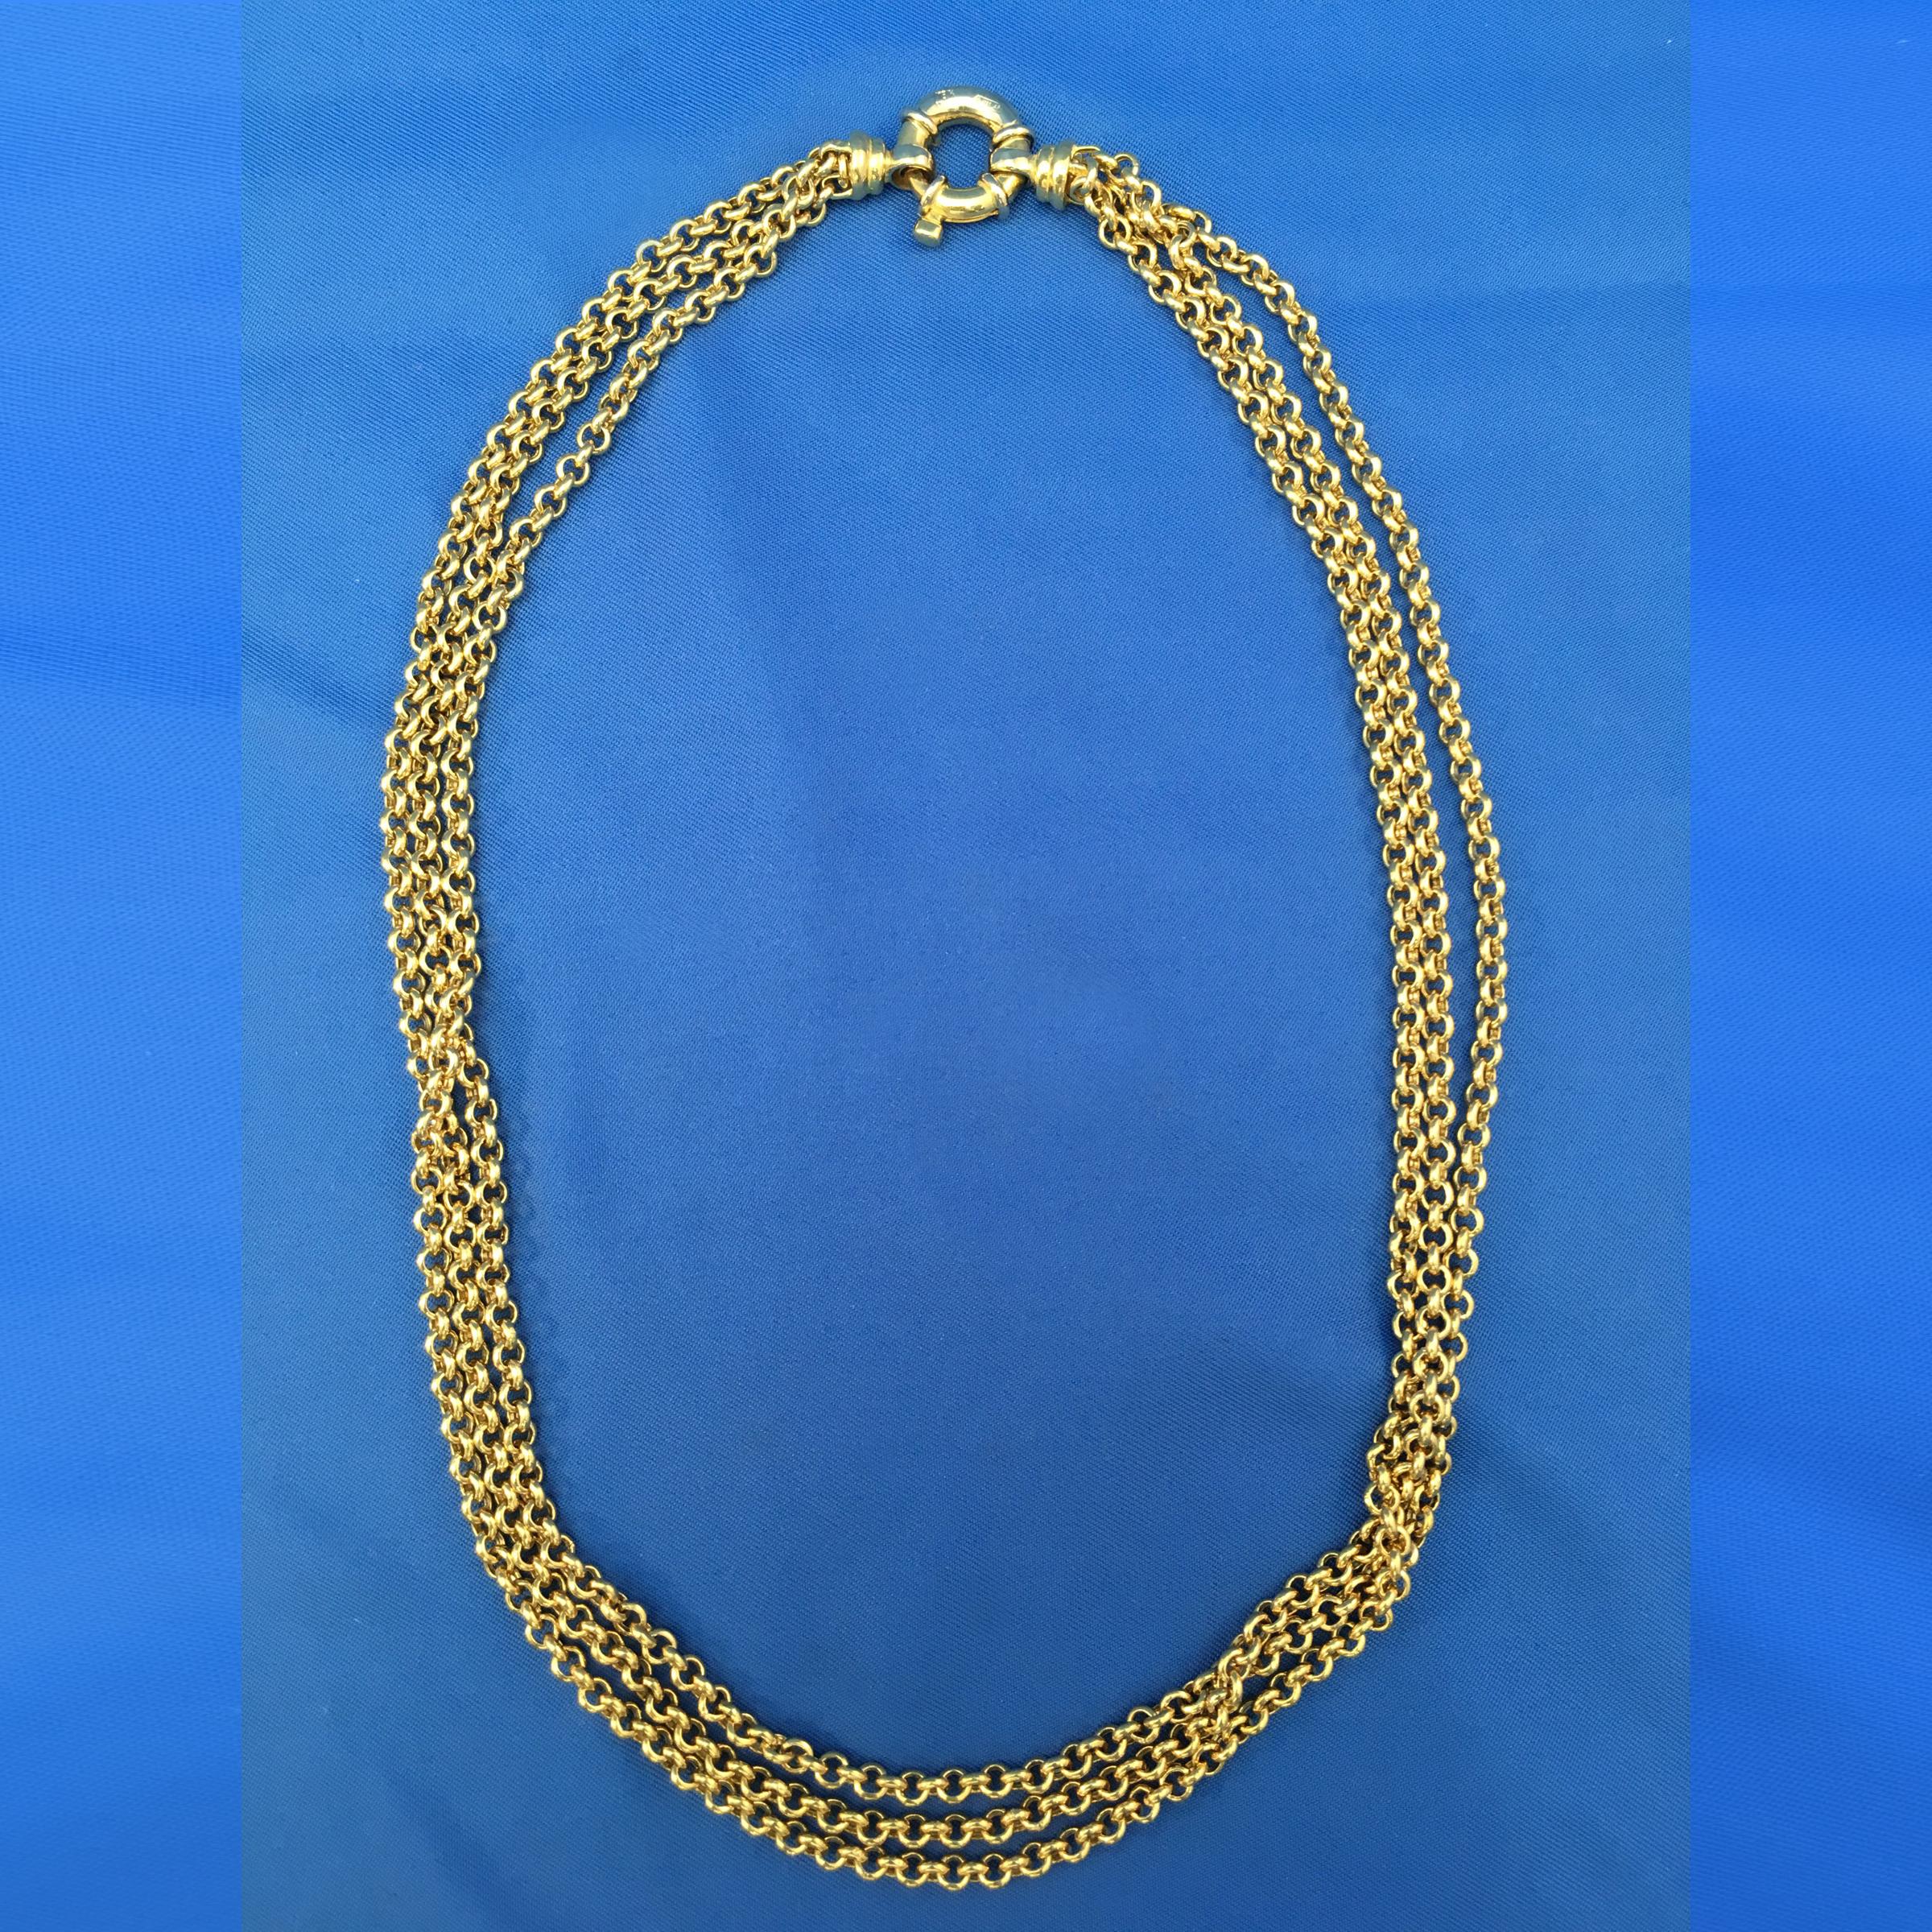 Women's or Men's Choker Length Triple Rolo Chain with Bolt Ring Closure in 18 Karat Yellow Gold